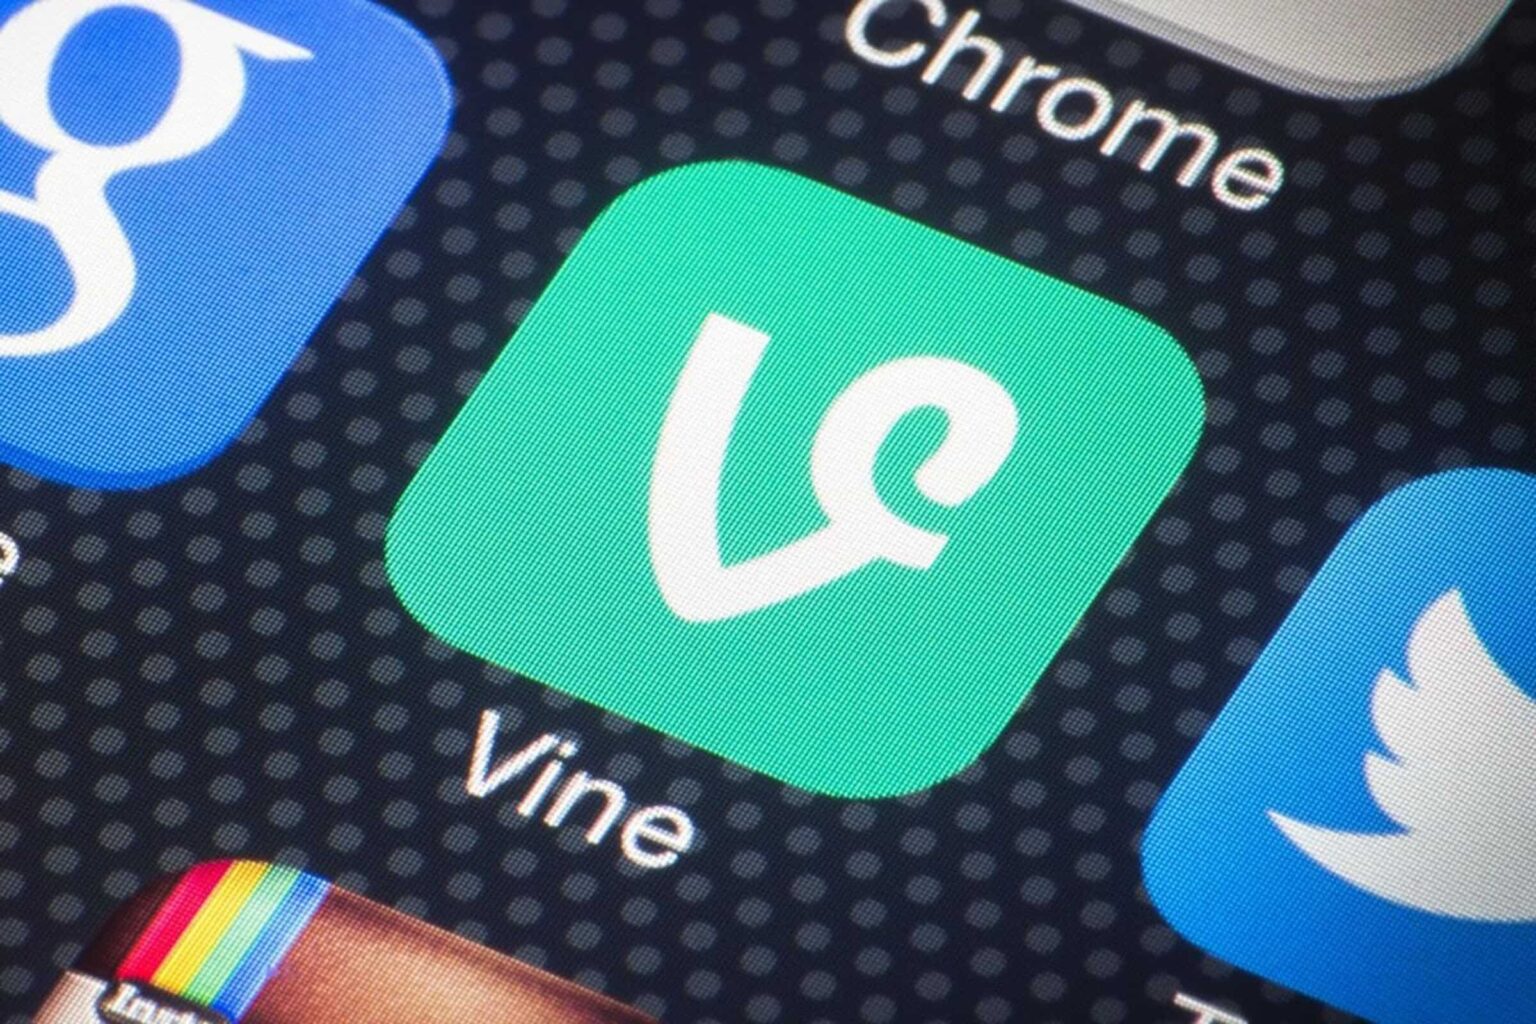 Many of today’s creators still mourn the loss of the Vine app. If you're one of them – watch these hilarious TikToks instead!